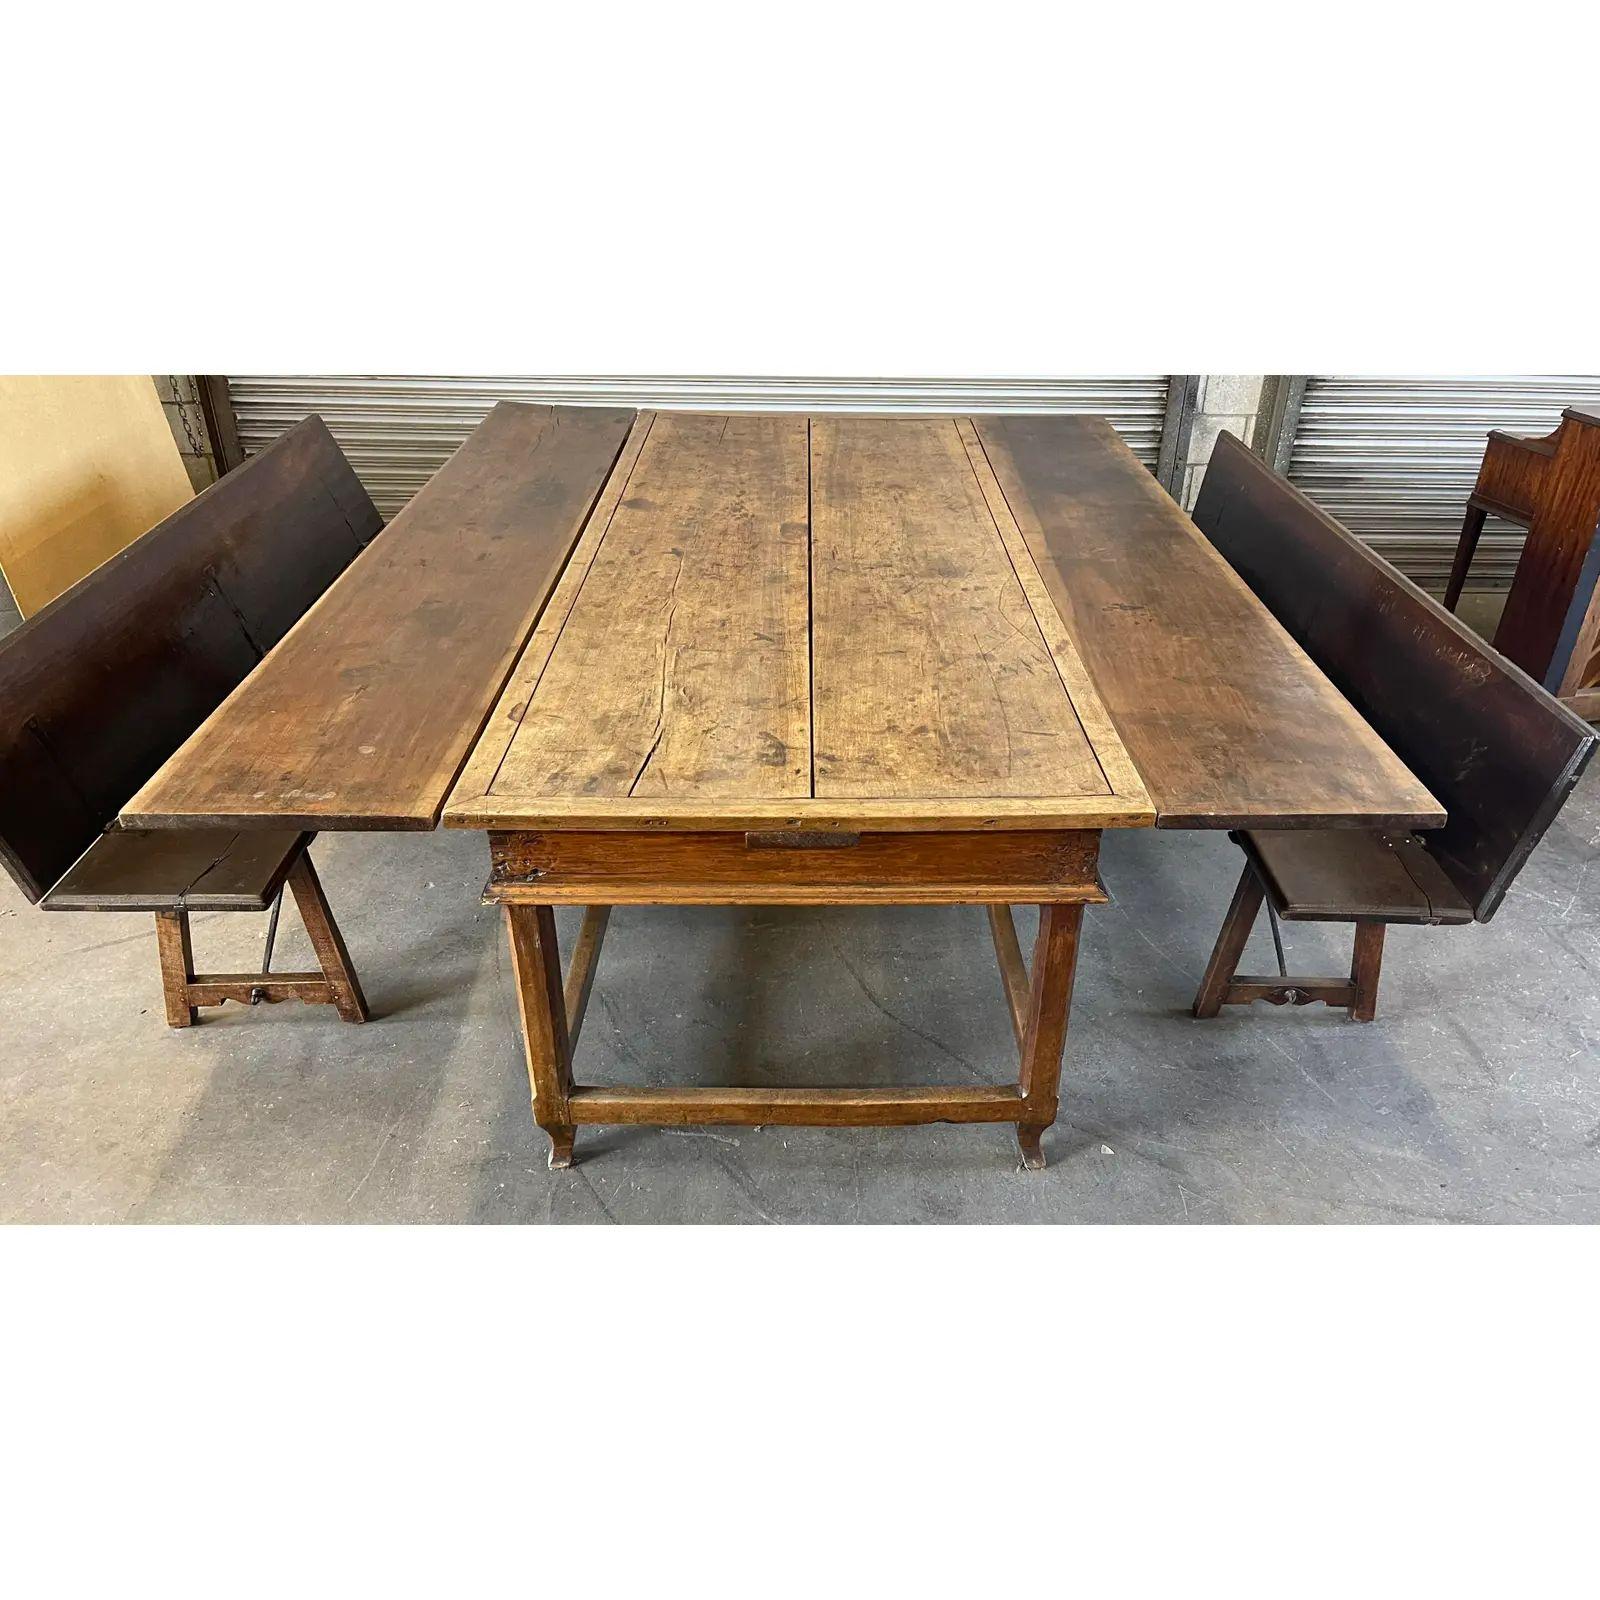 Antique French Country Farmhouse Extension Table & Bench Seating, 18th Century For Sale 2